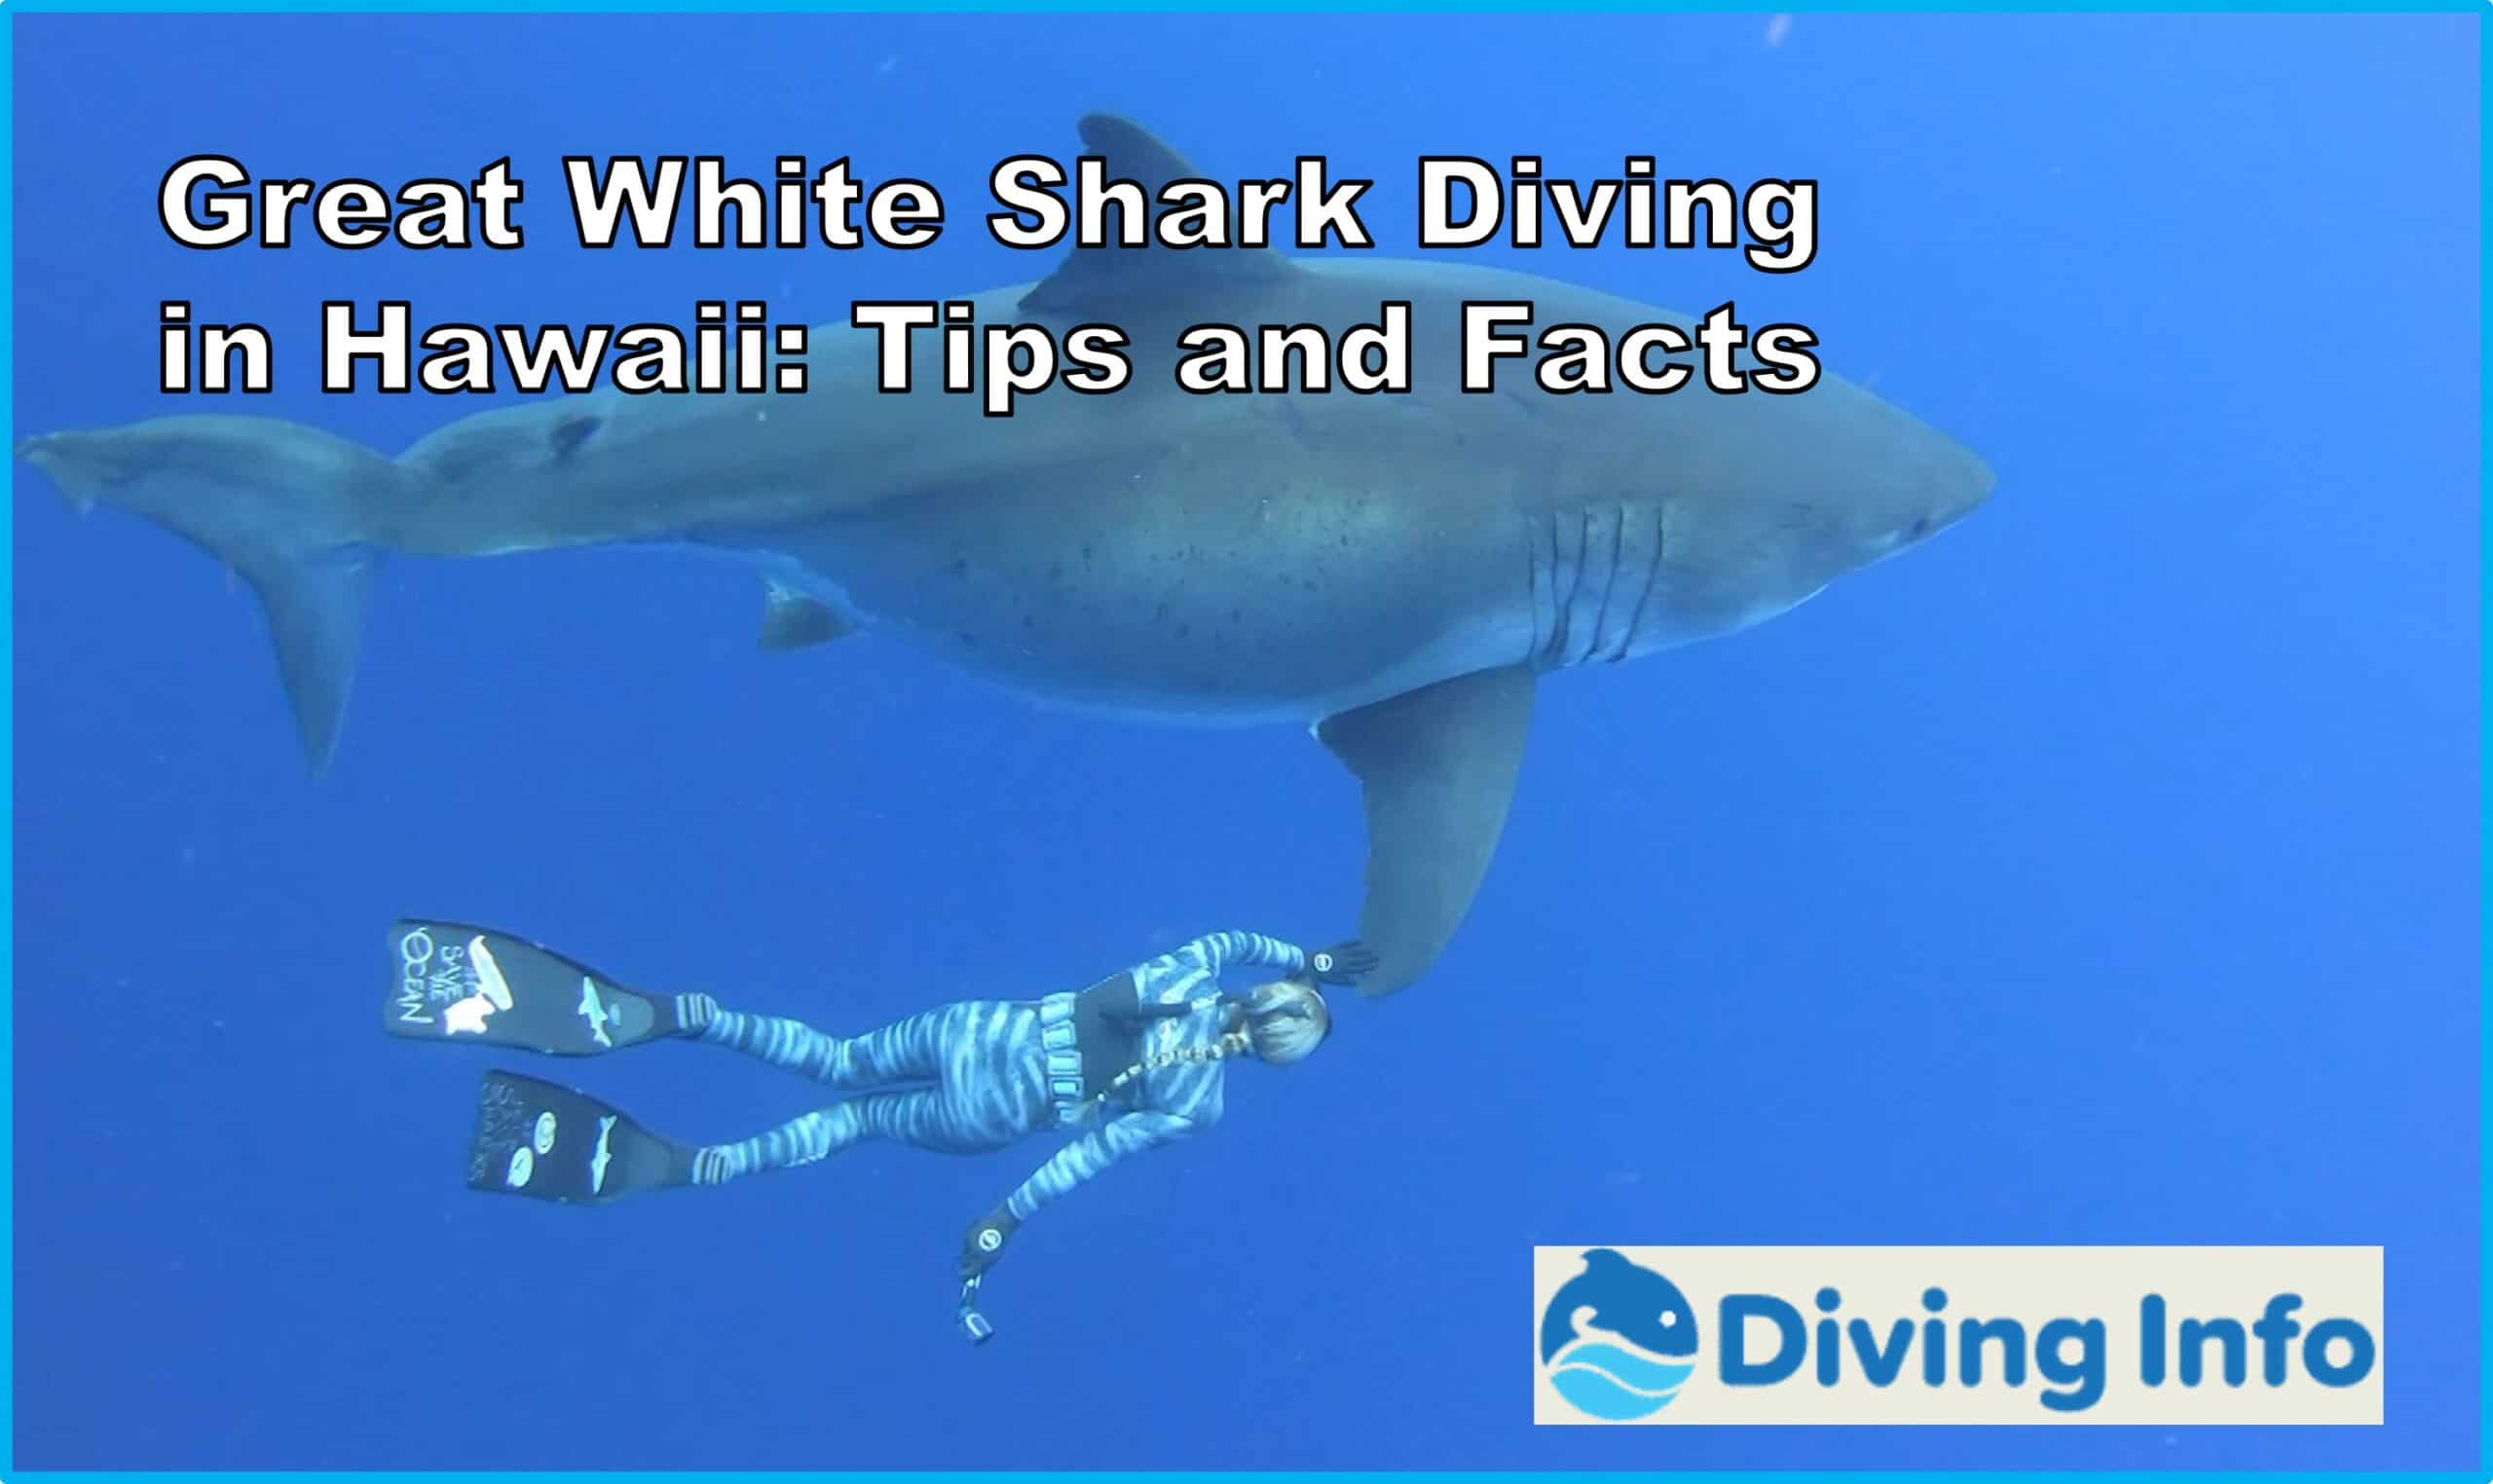 Great White Shark Diving in Hawaii Tips and Facts